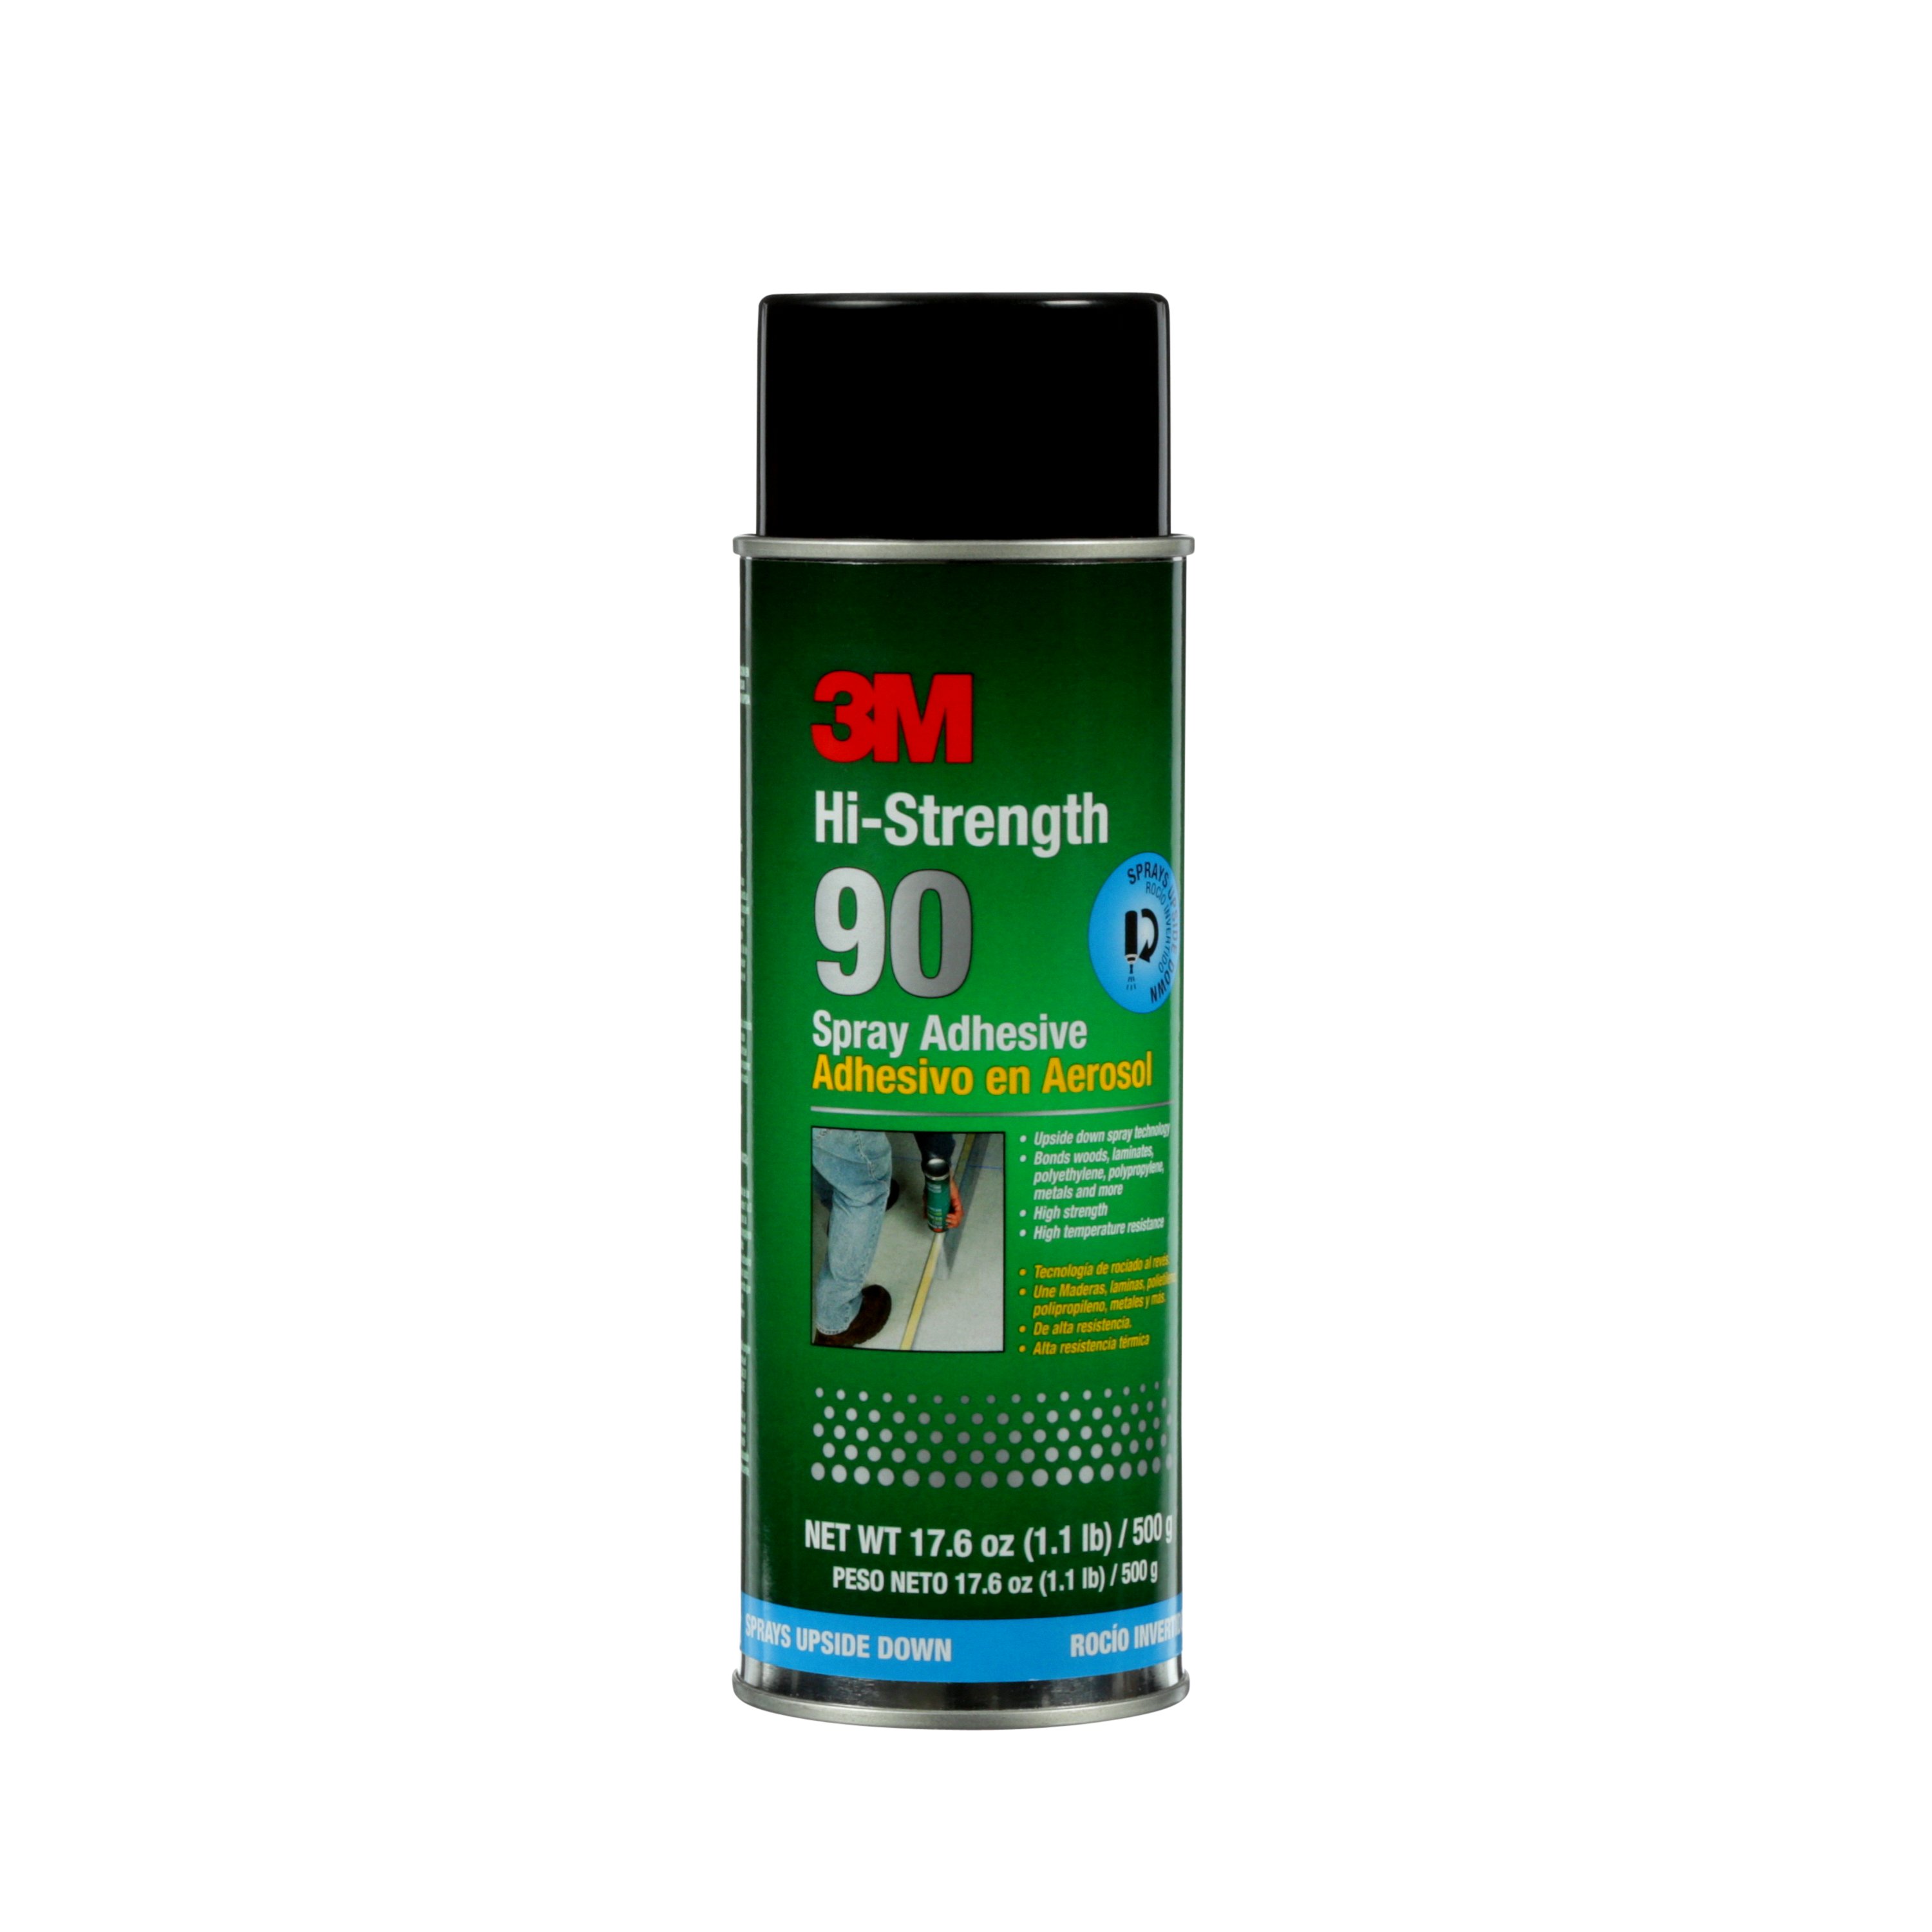 3M™ Hi-Strength 90 Spray Adhesive, INVERTED Aerosol Net Wt 17.6 oz, 12 cans  per case - NOT FOR SALE OR USE IN CA & OTHER STATES. CONSULT LOCAL AIR  QUALITY RULES BEFORE